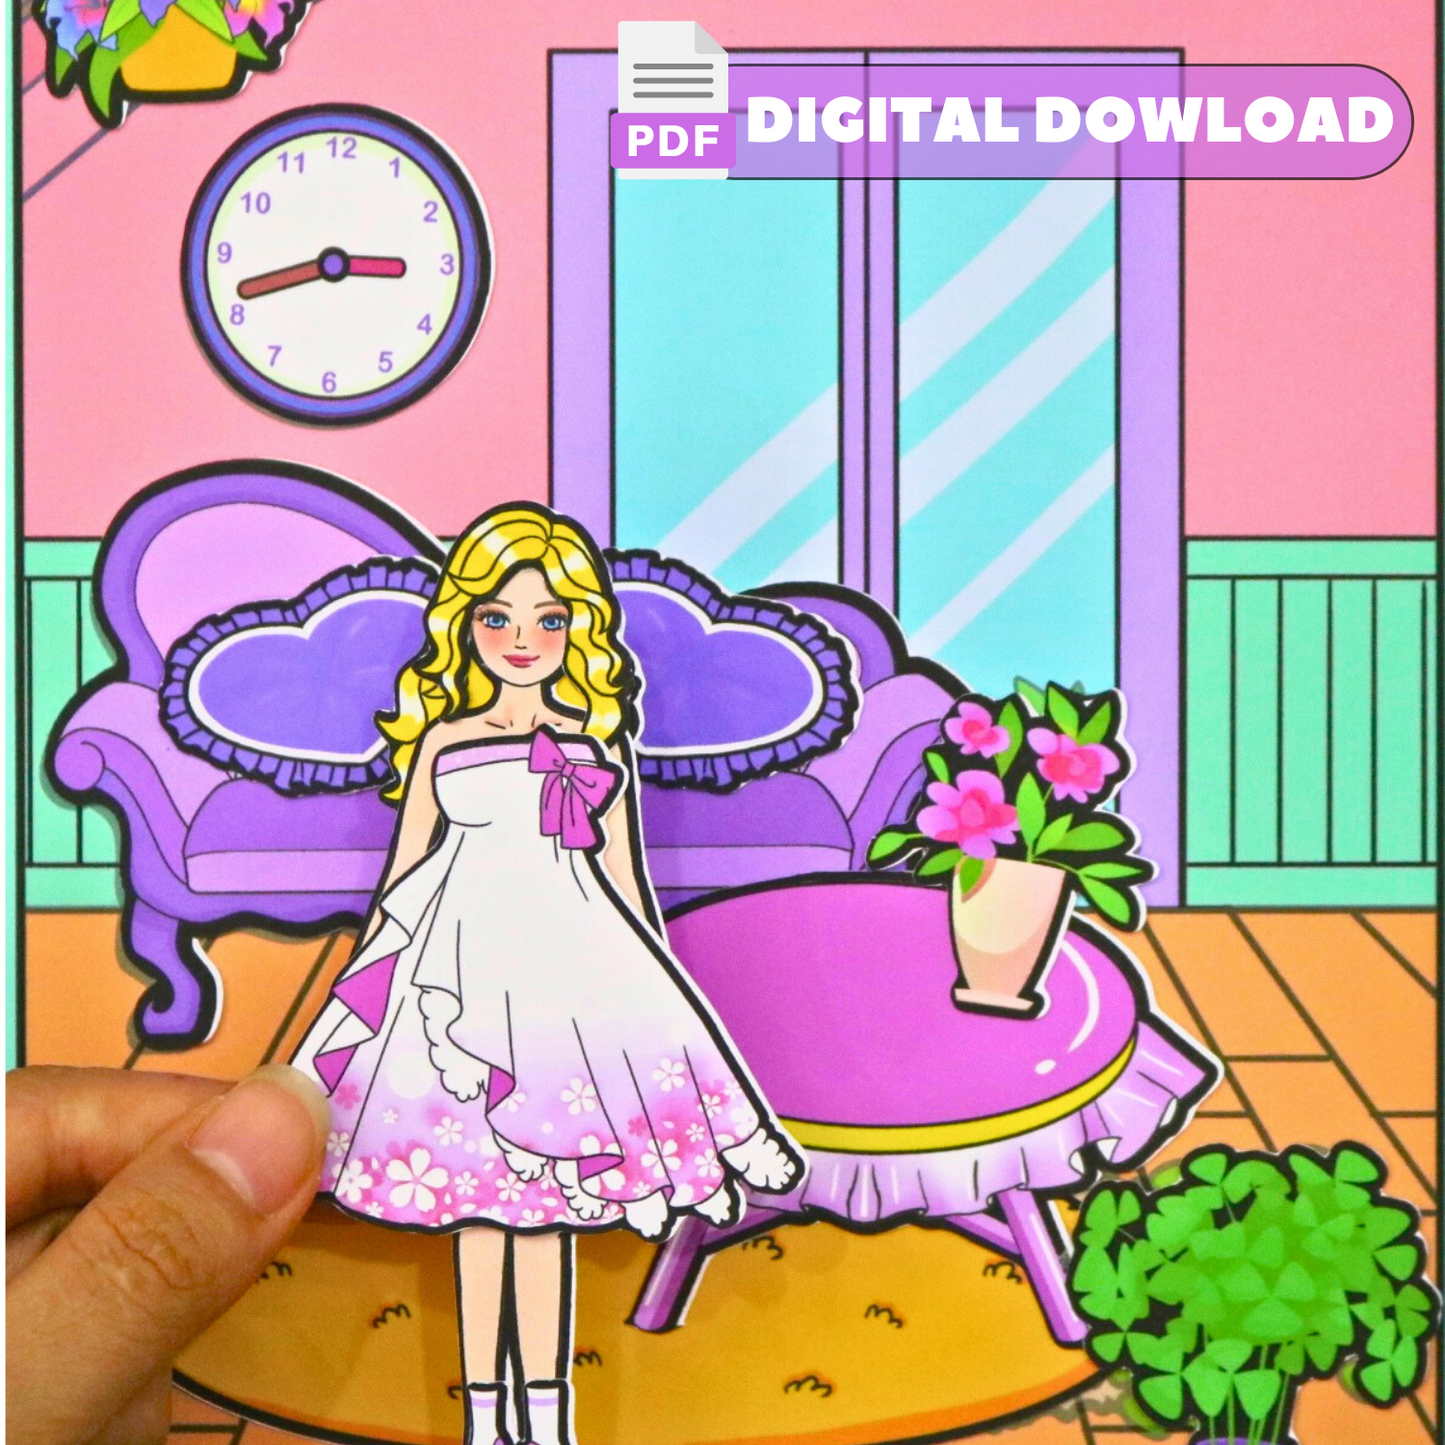 Happy Doll House Printable DIY project Dream Dollhouse with Paper Dolls Busy Book & Activities for Kids PDF 🌈 Woa Doll Crafts